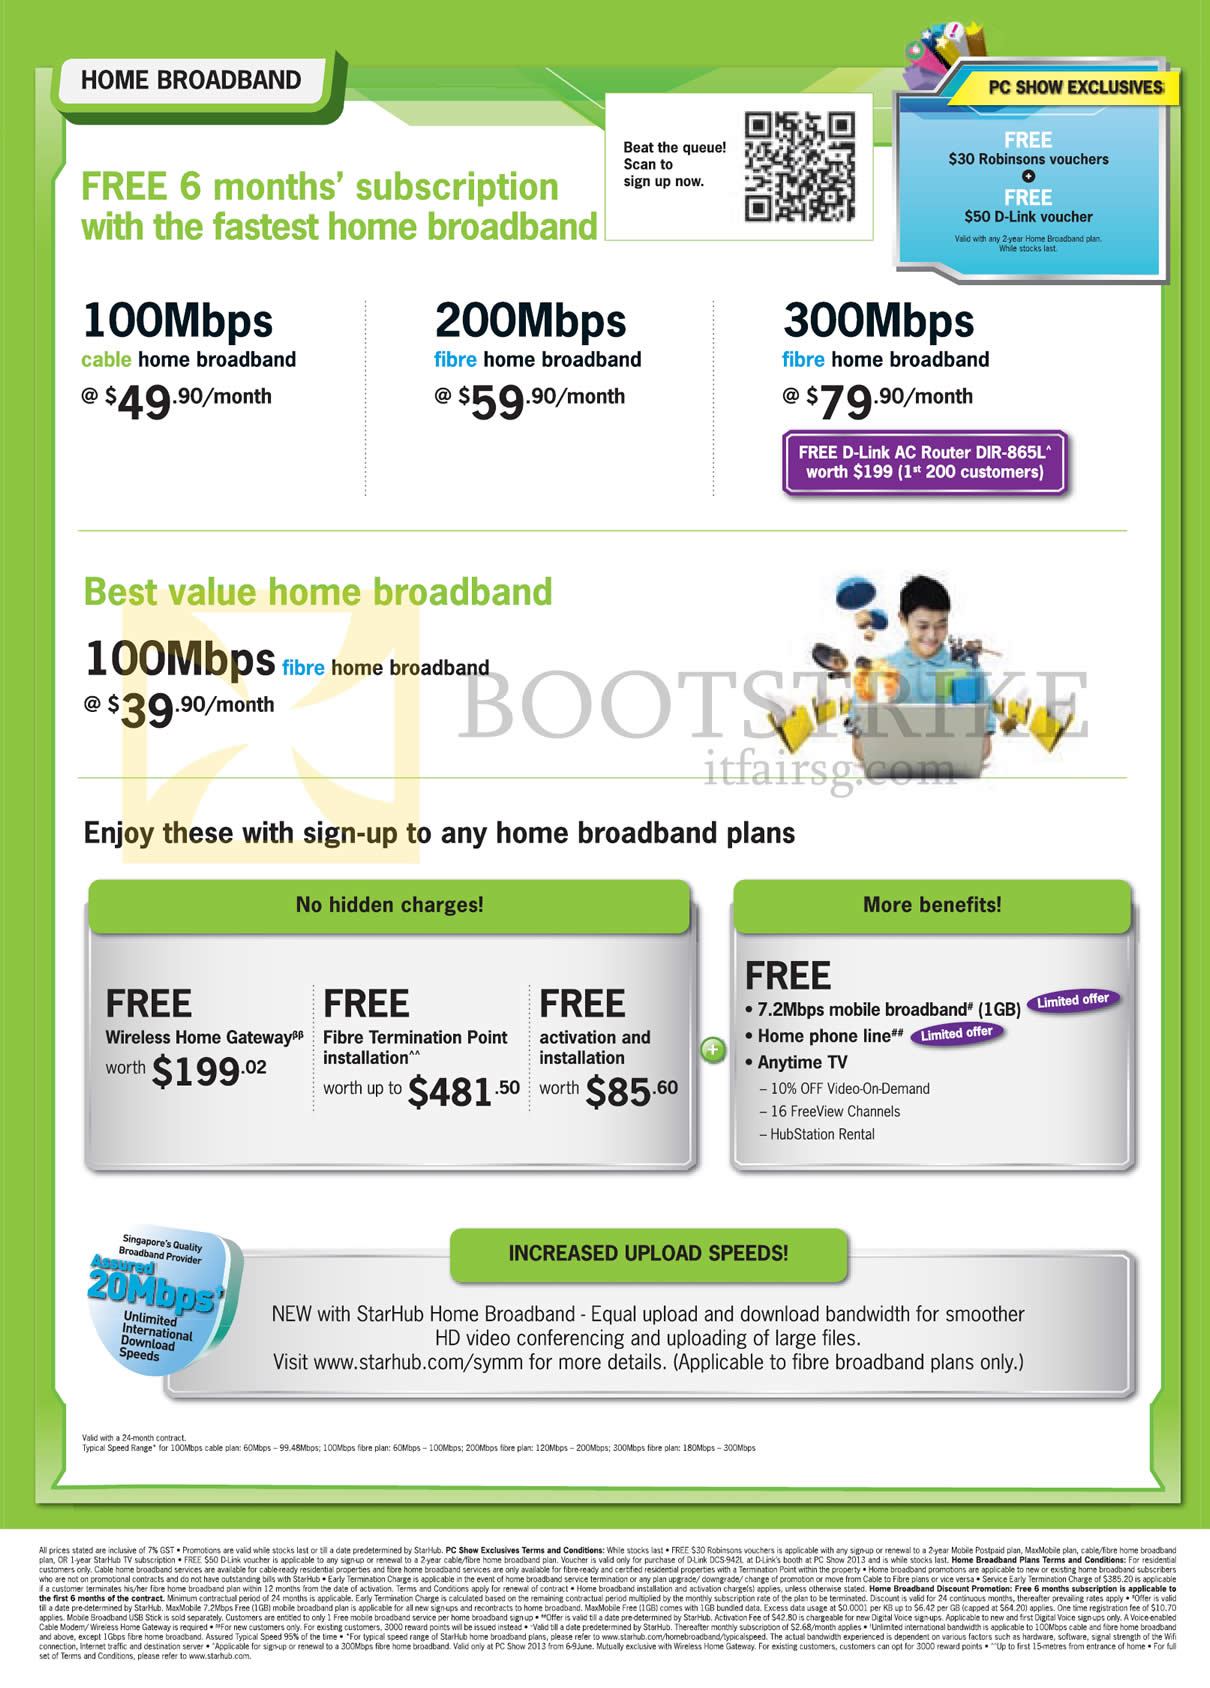 PC SHOW 2013 price list image brochure of Starhub Broadband Cable Free 6 Months Subscription 100Mbps 200 Mbps 300Mbps, 39.90 100mbps, Increased Symmetrical Upload Speeds